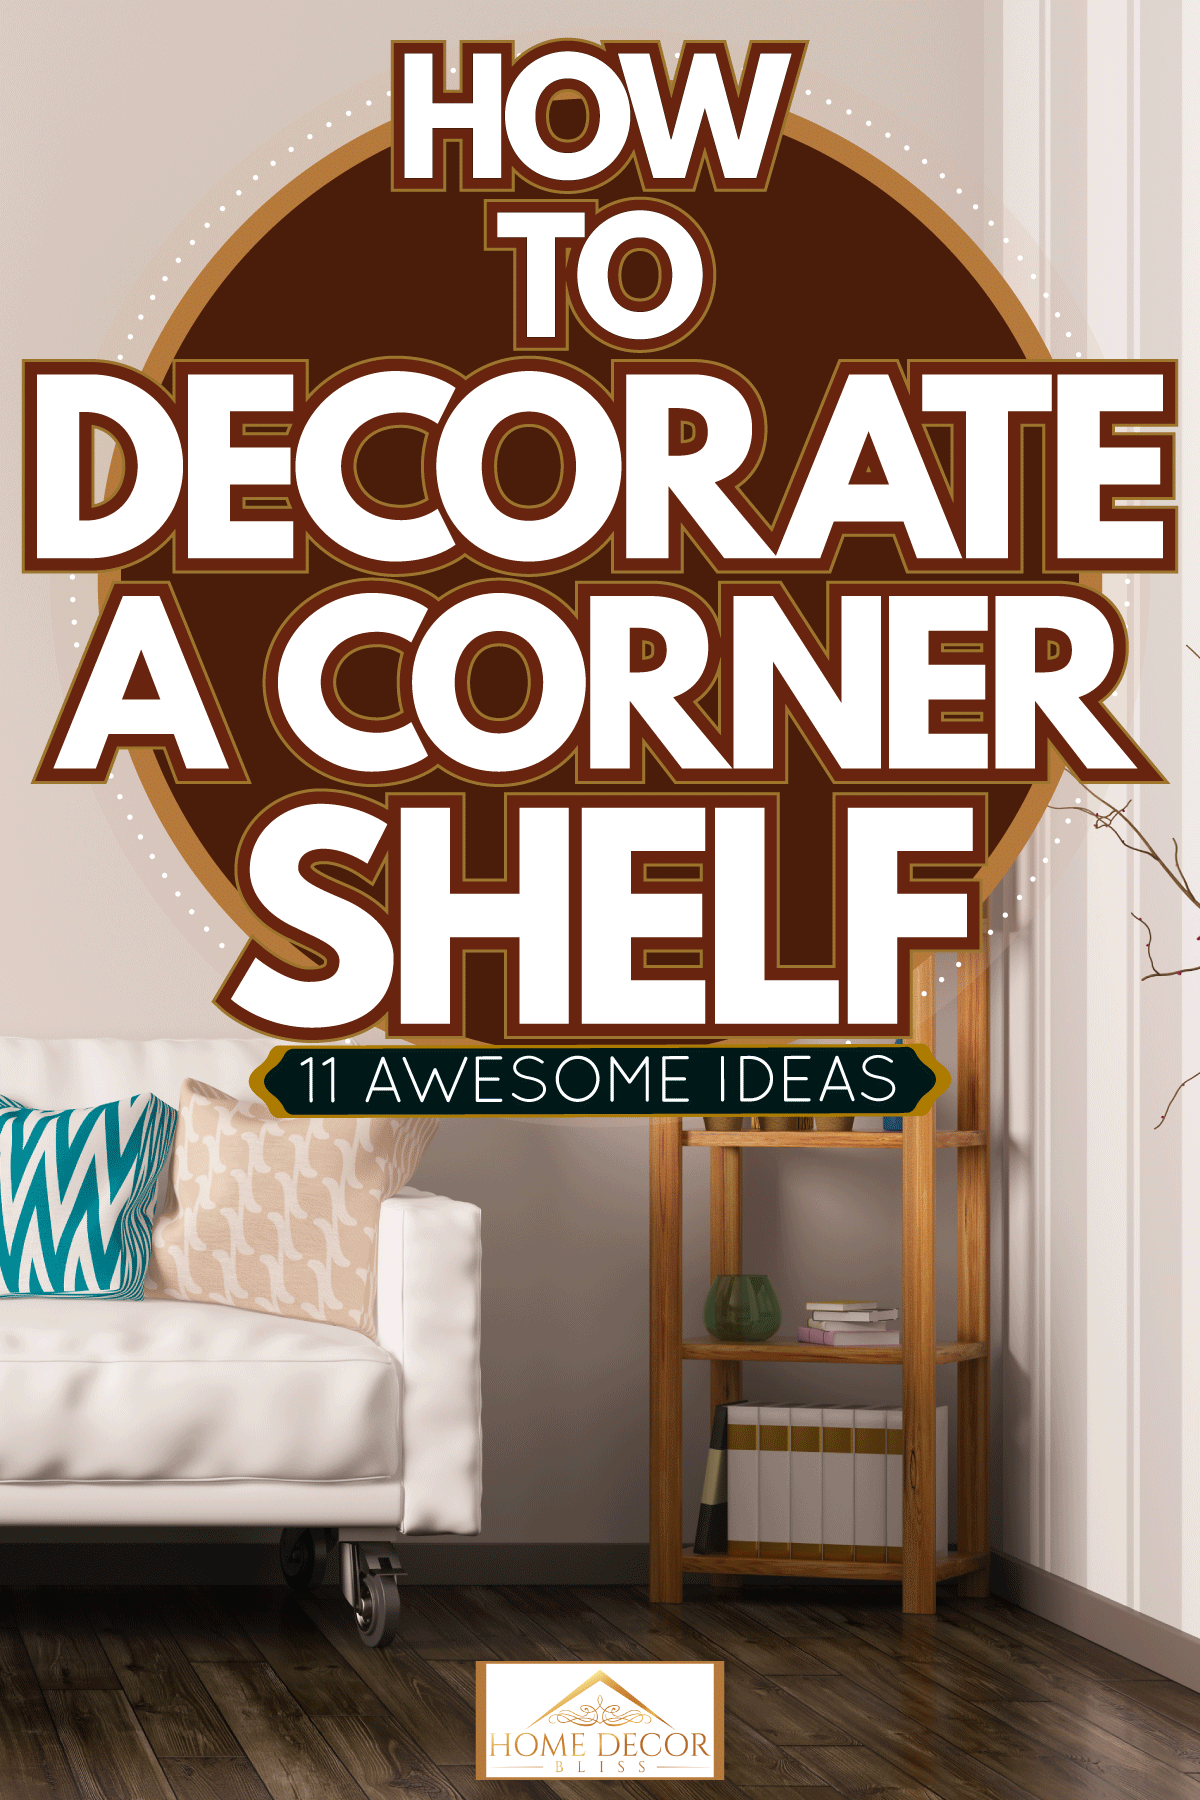 A white sofa with bright patterned throw pillows and a tall corner shelf inside a living room with laminated flooring, How To Decorate A Corner Shelf: 11 Awesome Ideas